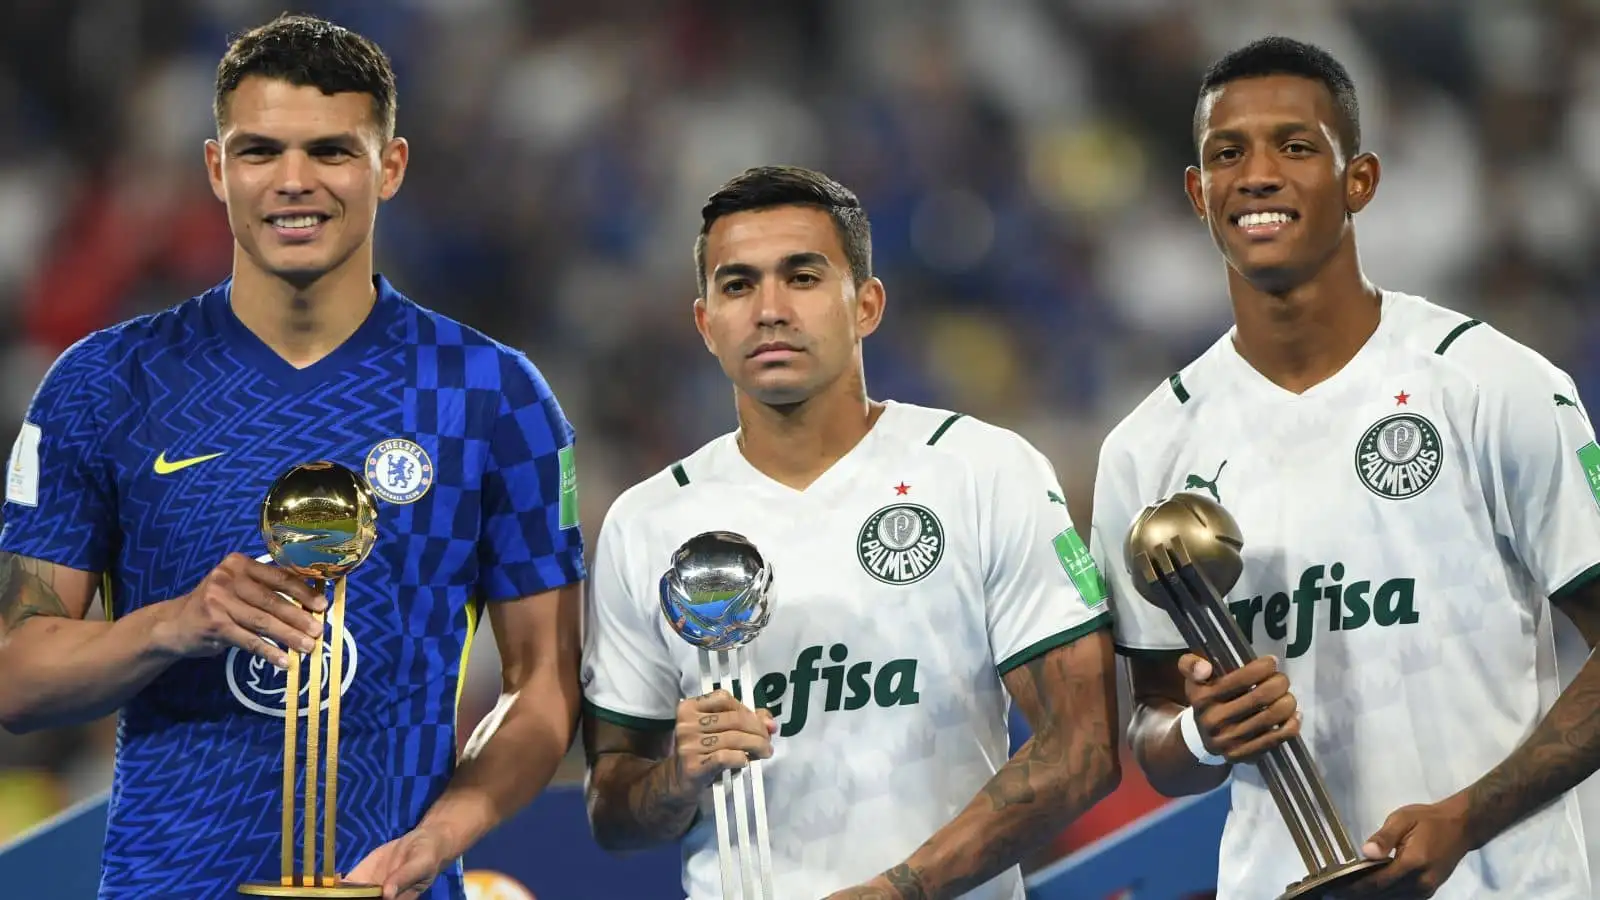 Chelsea's Thiago Silva with Golden Ball award, with silver winner Dudu (centre) and bronze winner Danilo after the FIFA Club World Cup Final match at the Mohammed Bin Zayed Stadium in Abu Dhabi, United Arab Emirates